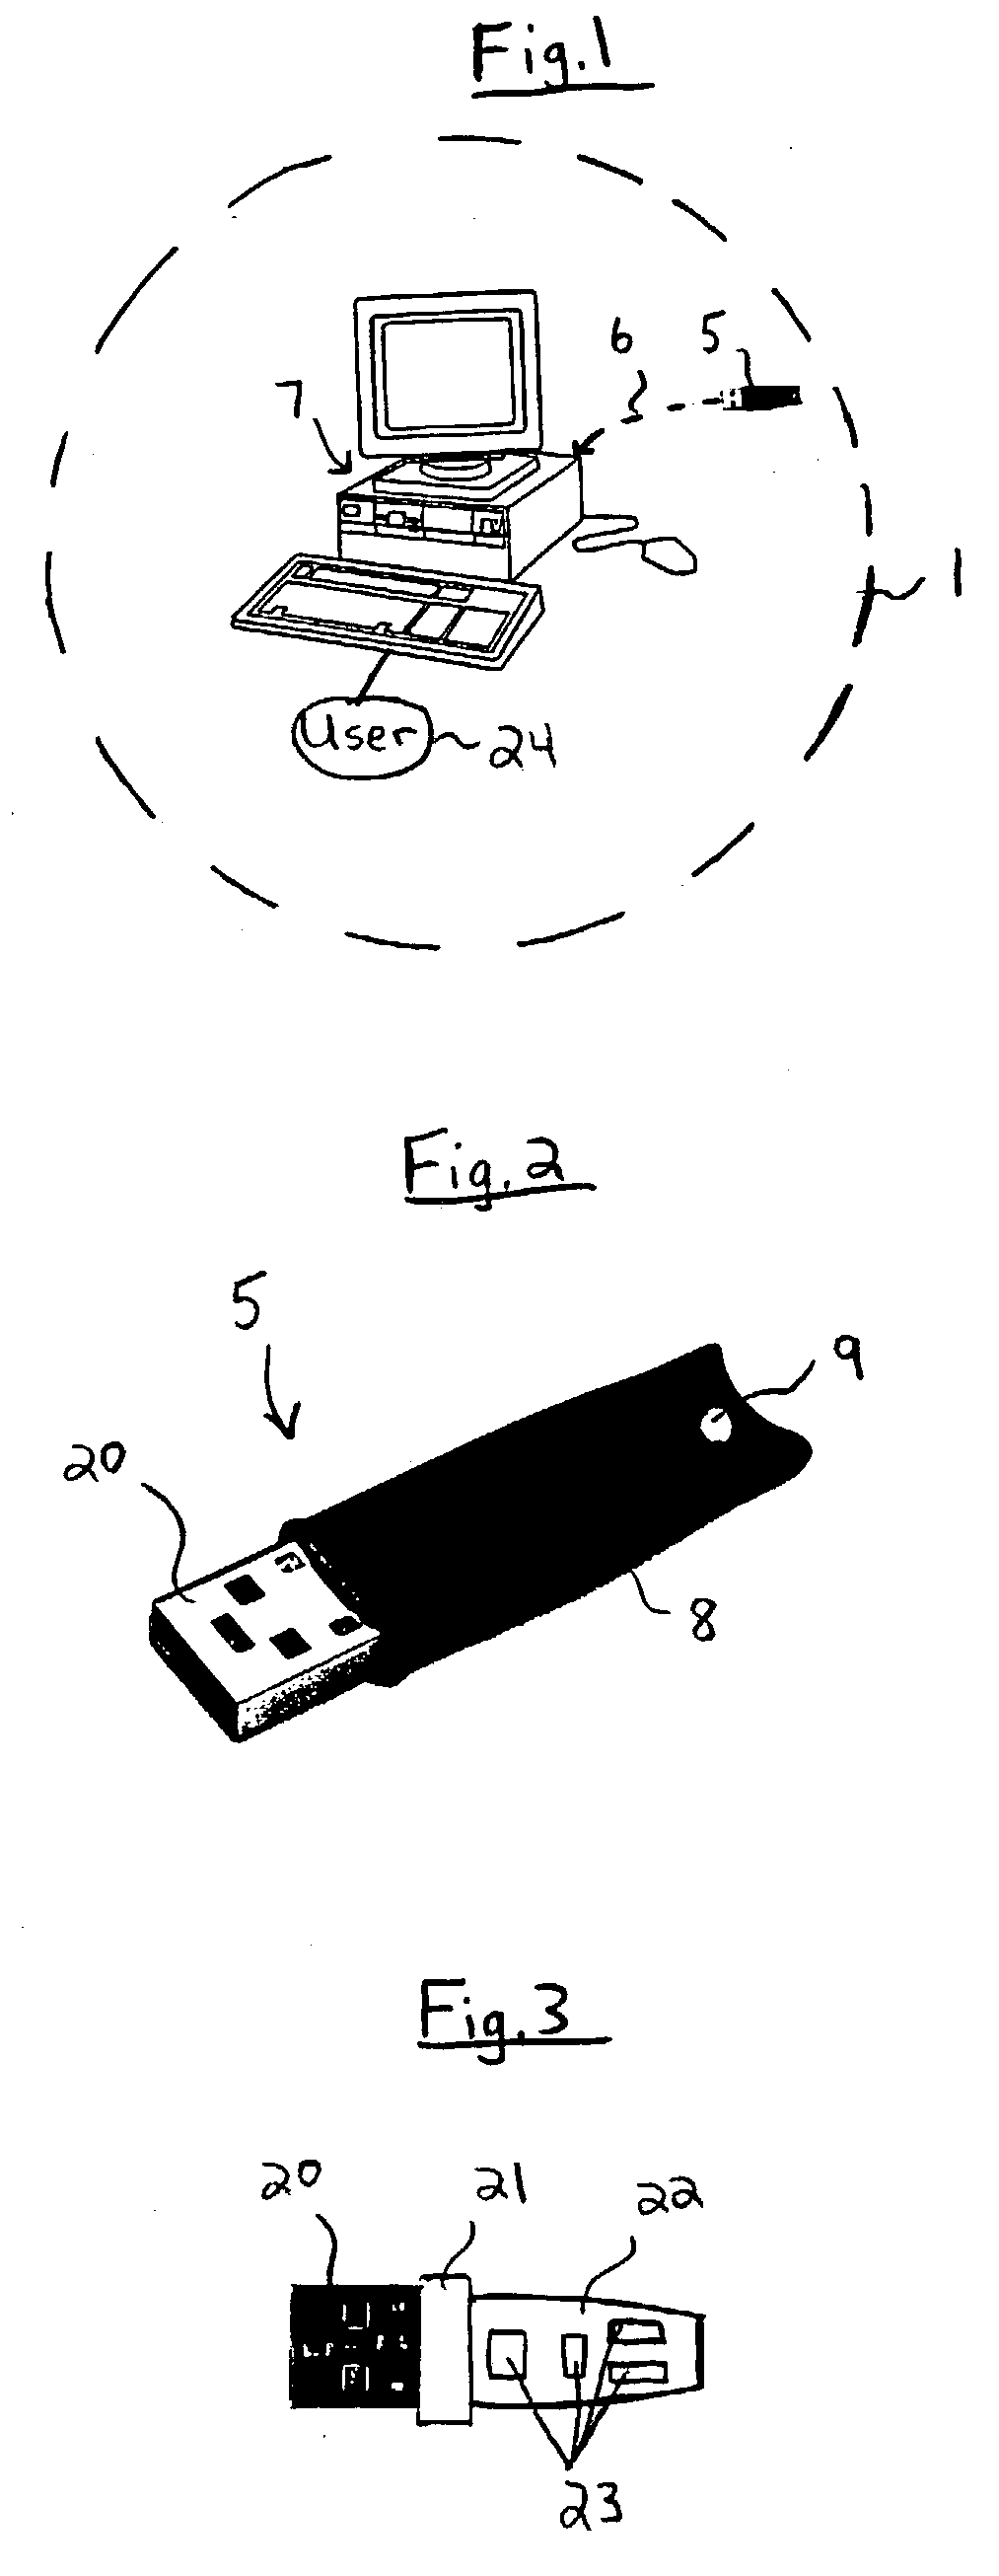 Portable system and method for health information storage, retrieval, and management